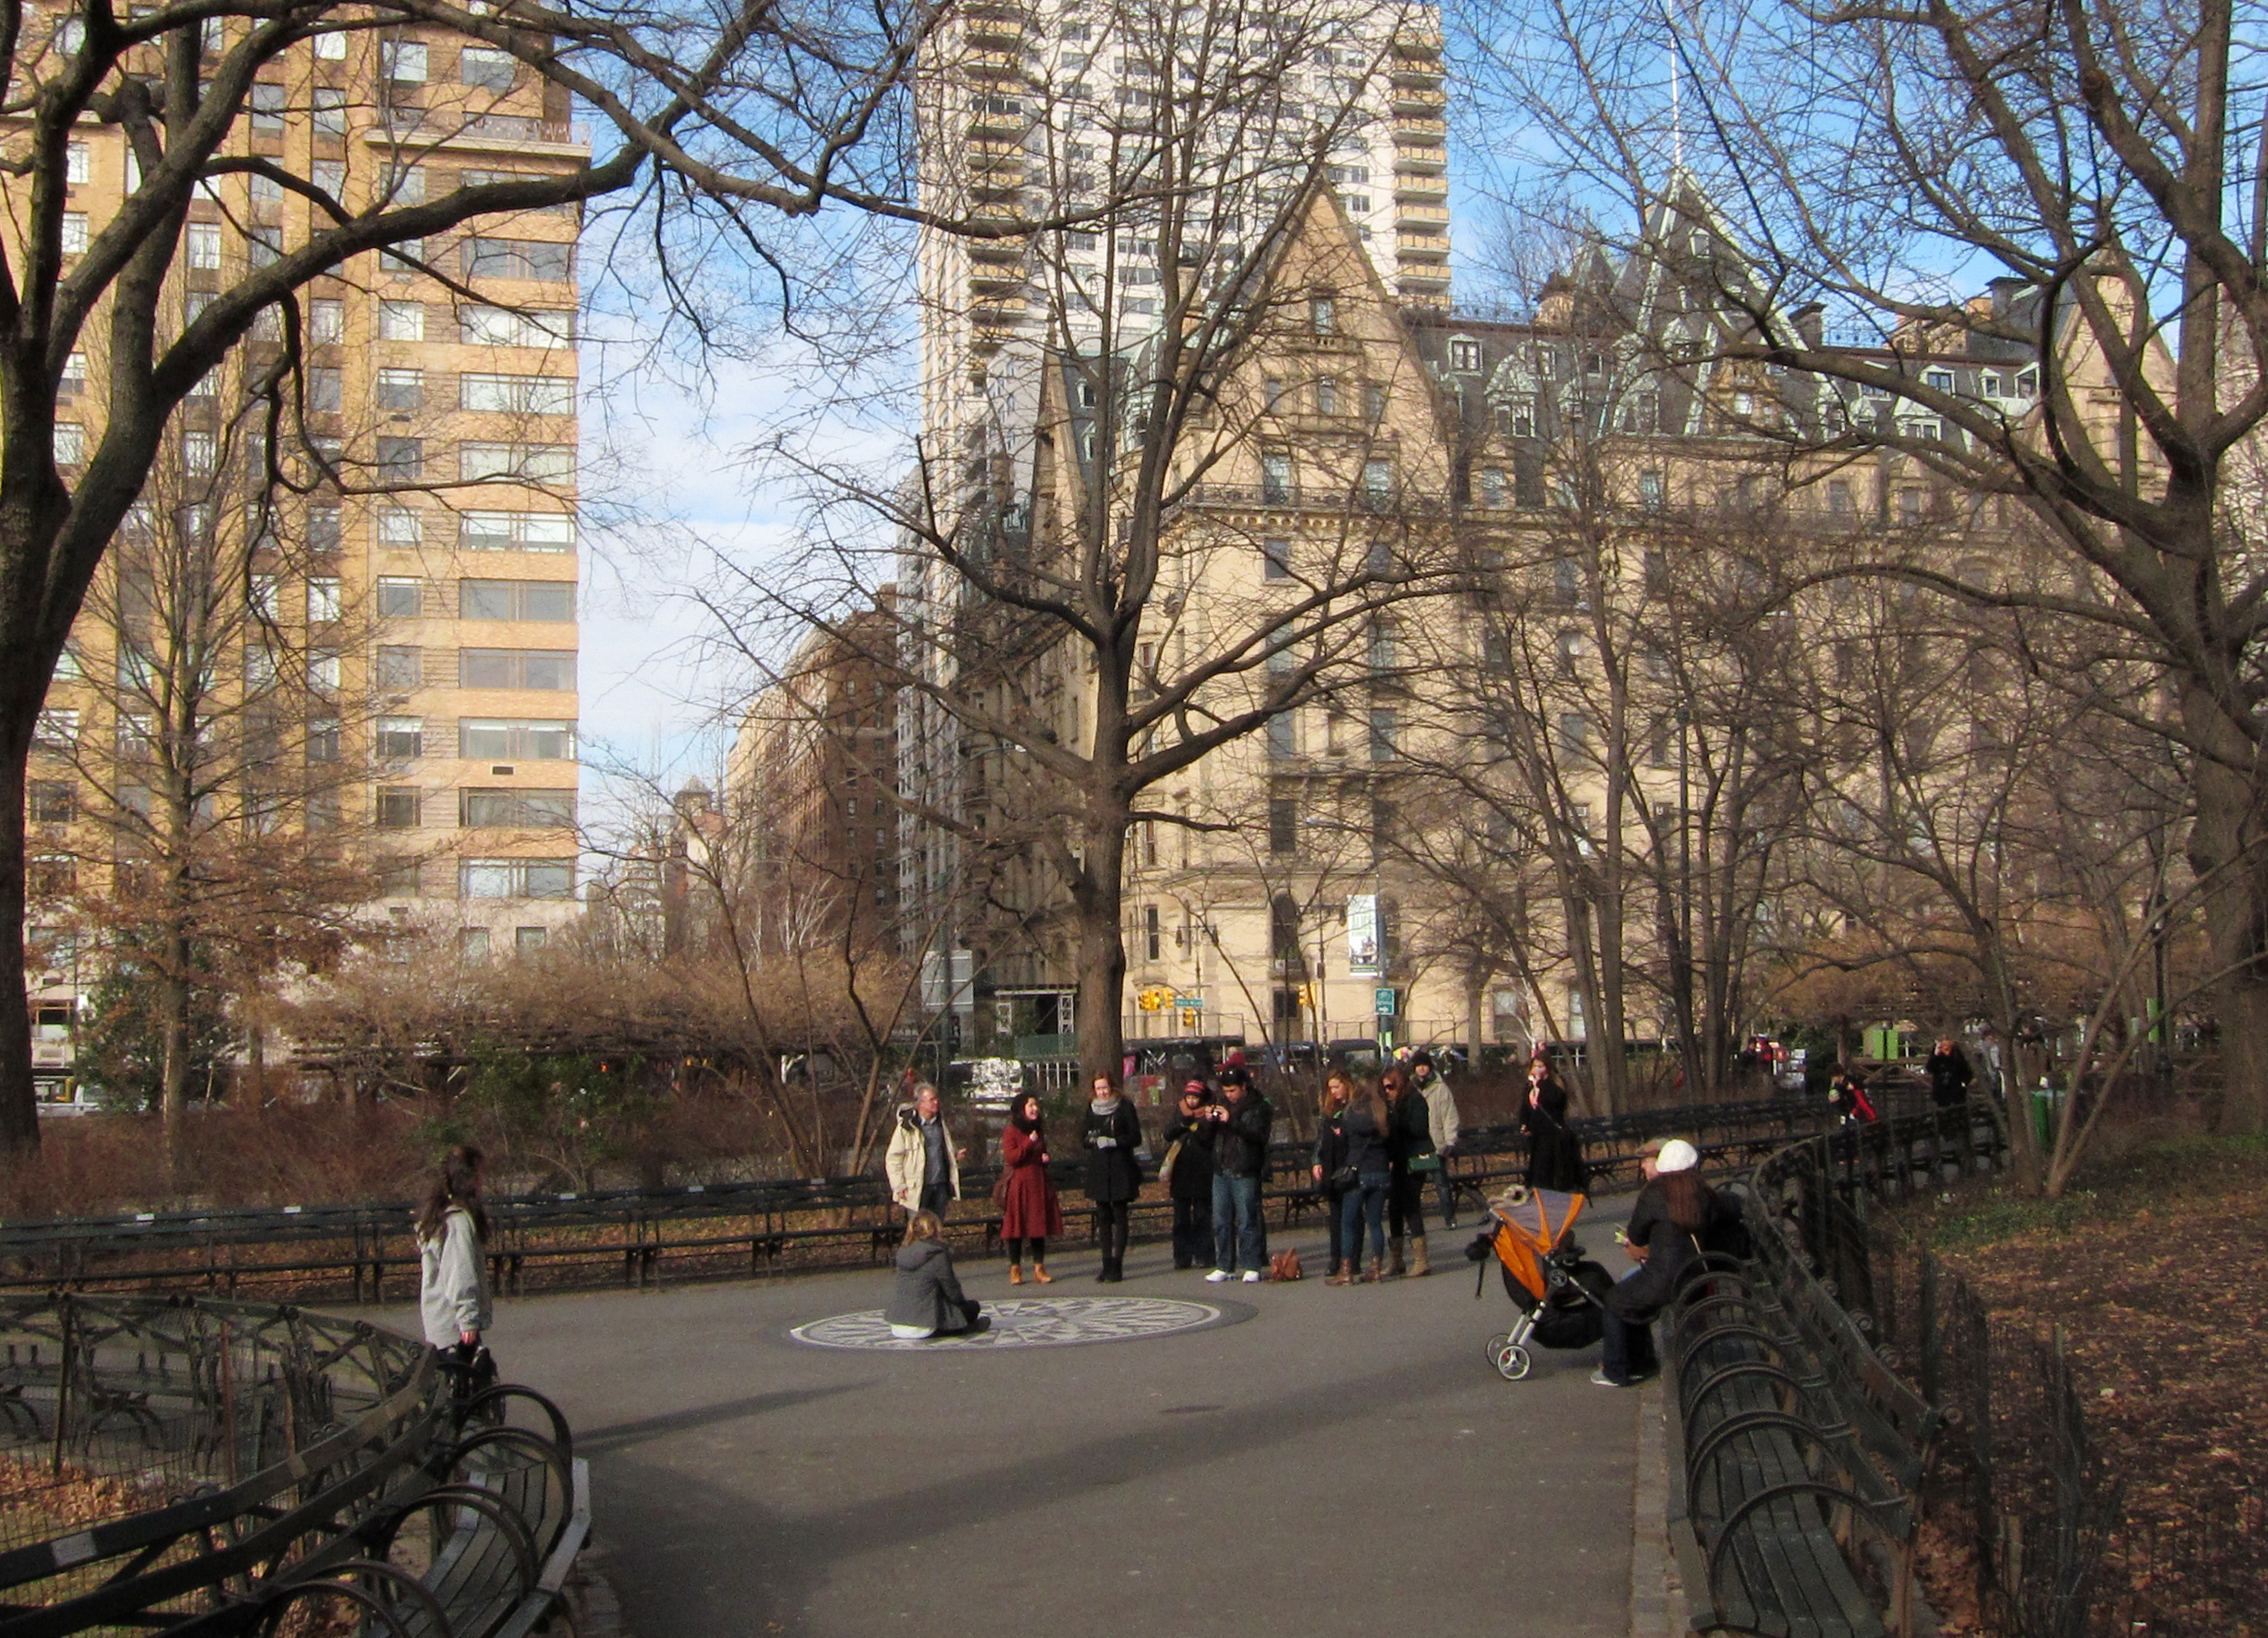 Strawberry Fields in Central Park, New York City, with The Dakota behind. Photo taken on December 27, 2013.